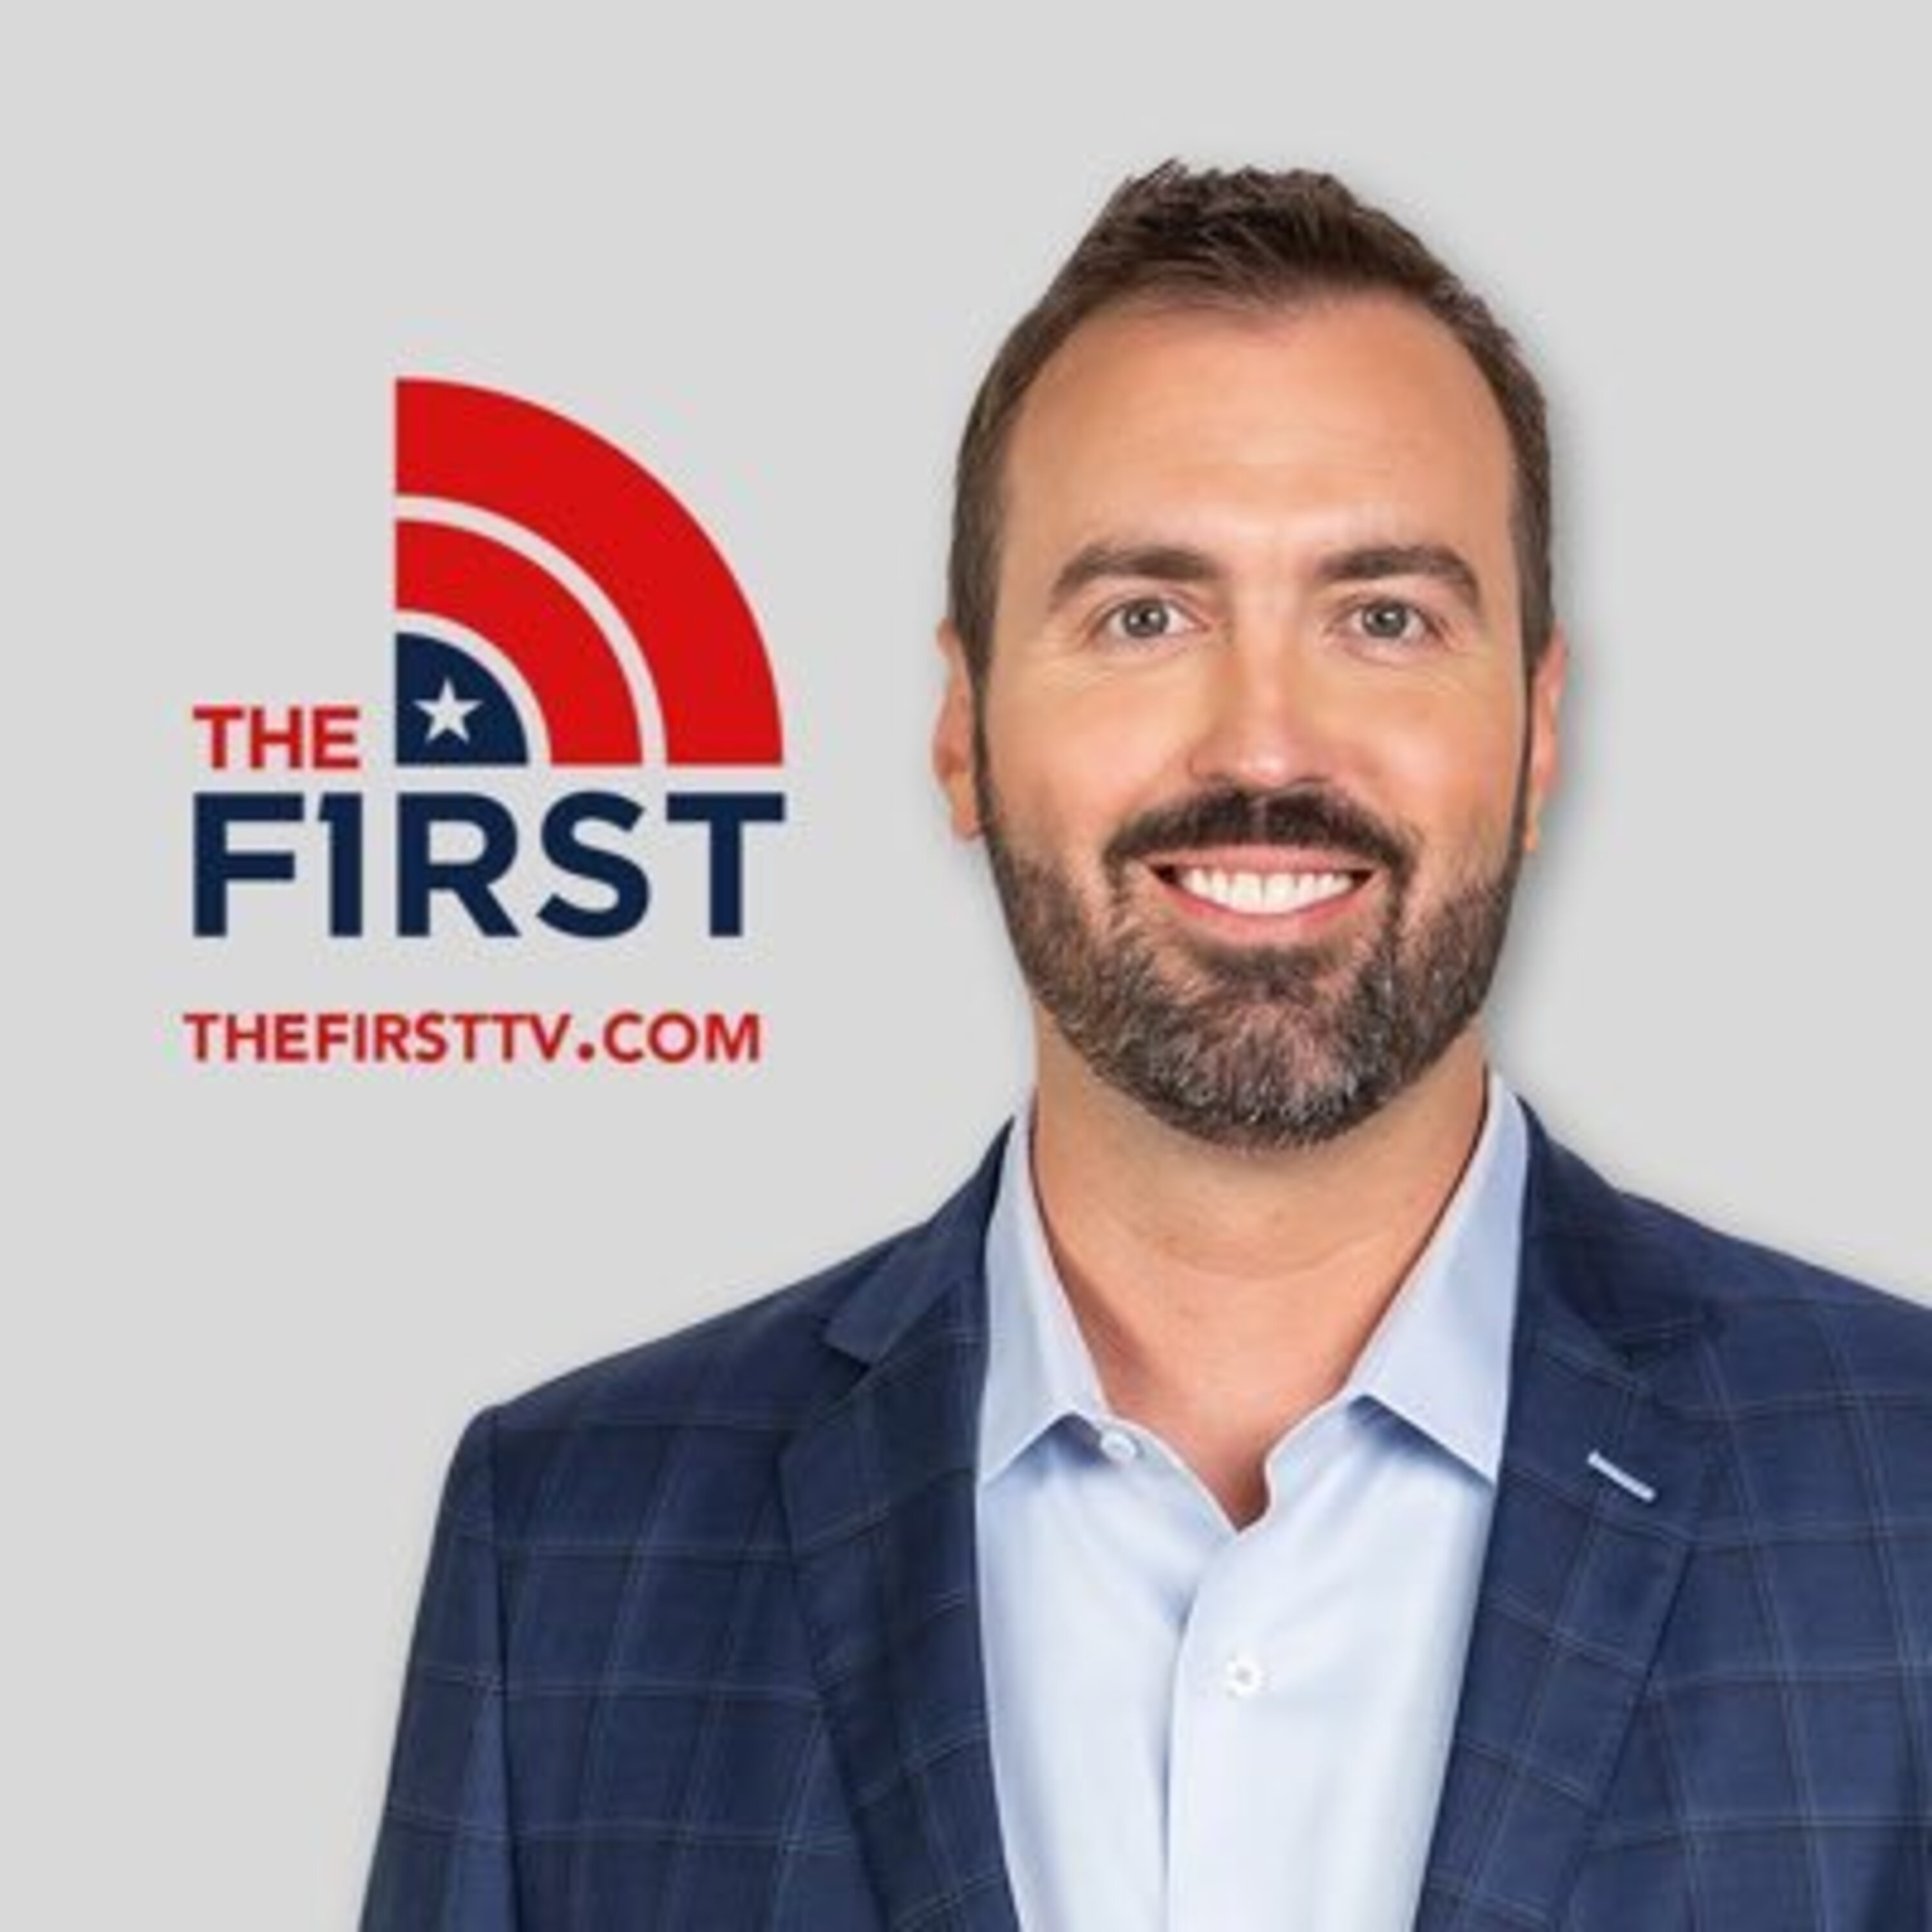 THE FIRST: Money, Power, & The LAW